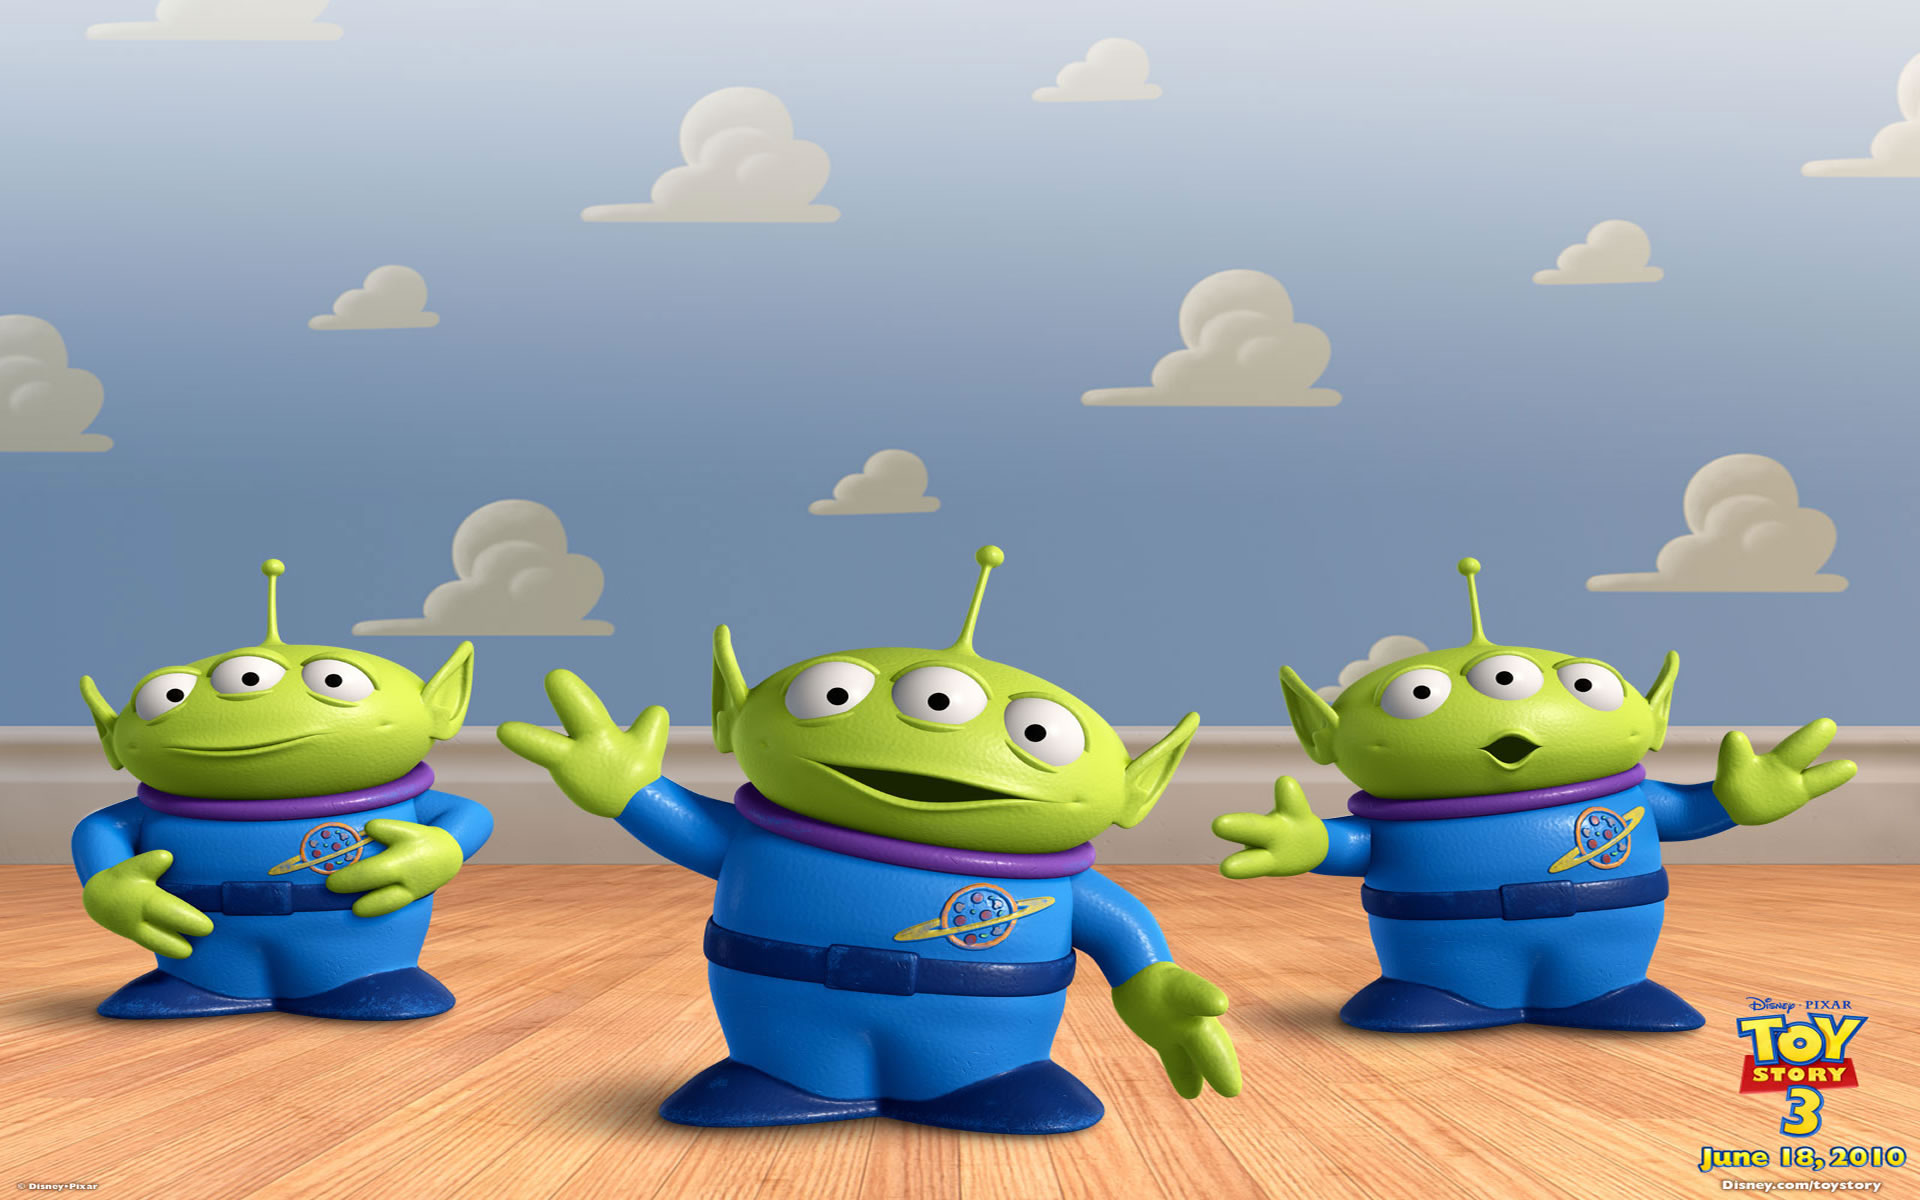 Toy Story 3 Wallpapers Trio de Marcianos   Wallpapers